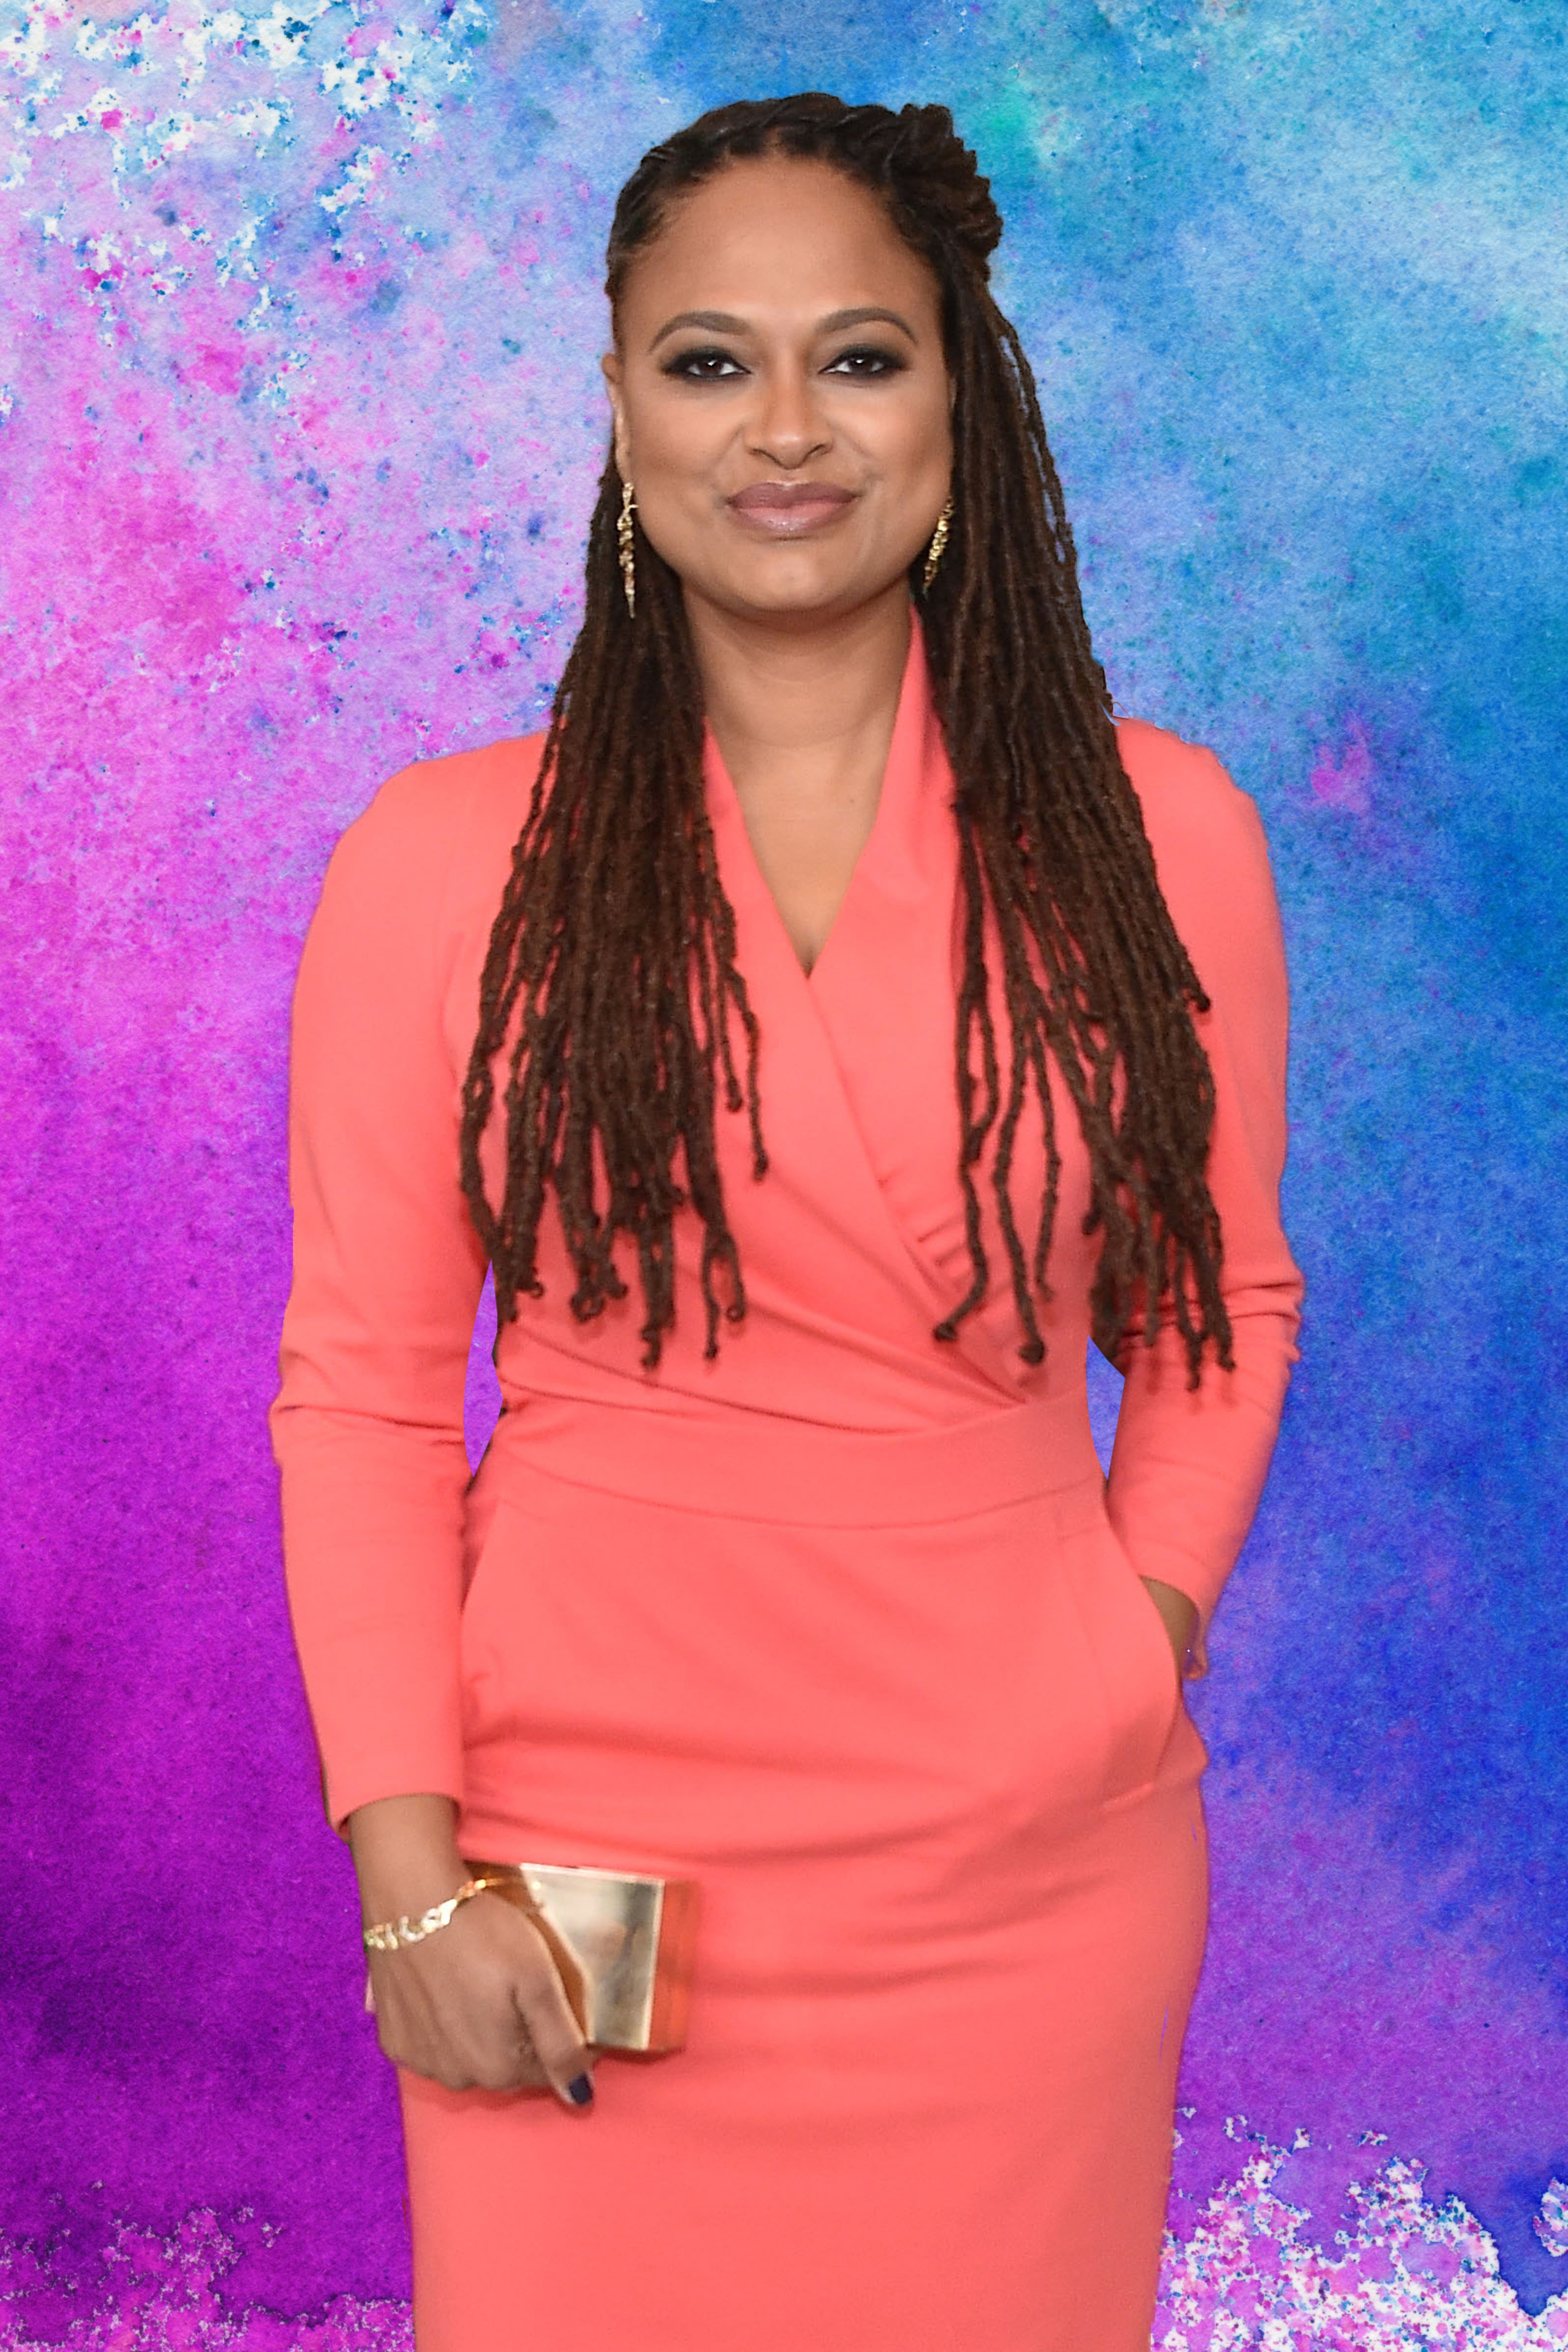 Black Excellence! Here Are 7 Ways Ava DuVernay Owned 2016
